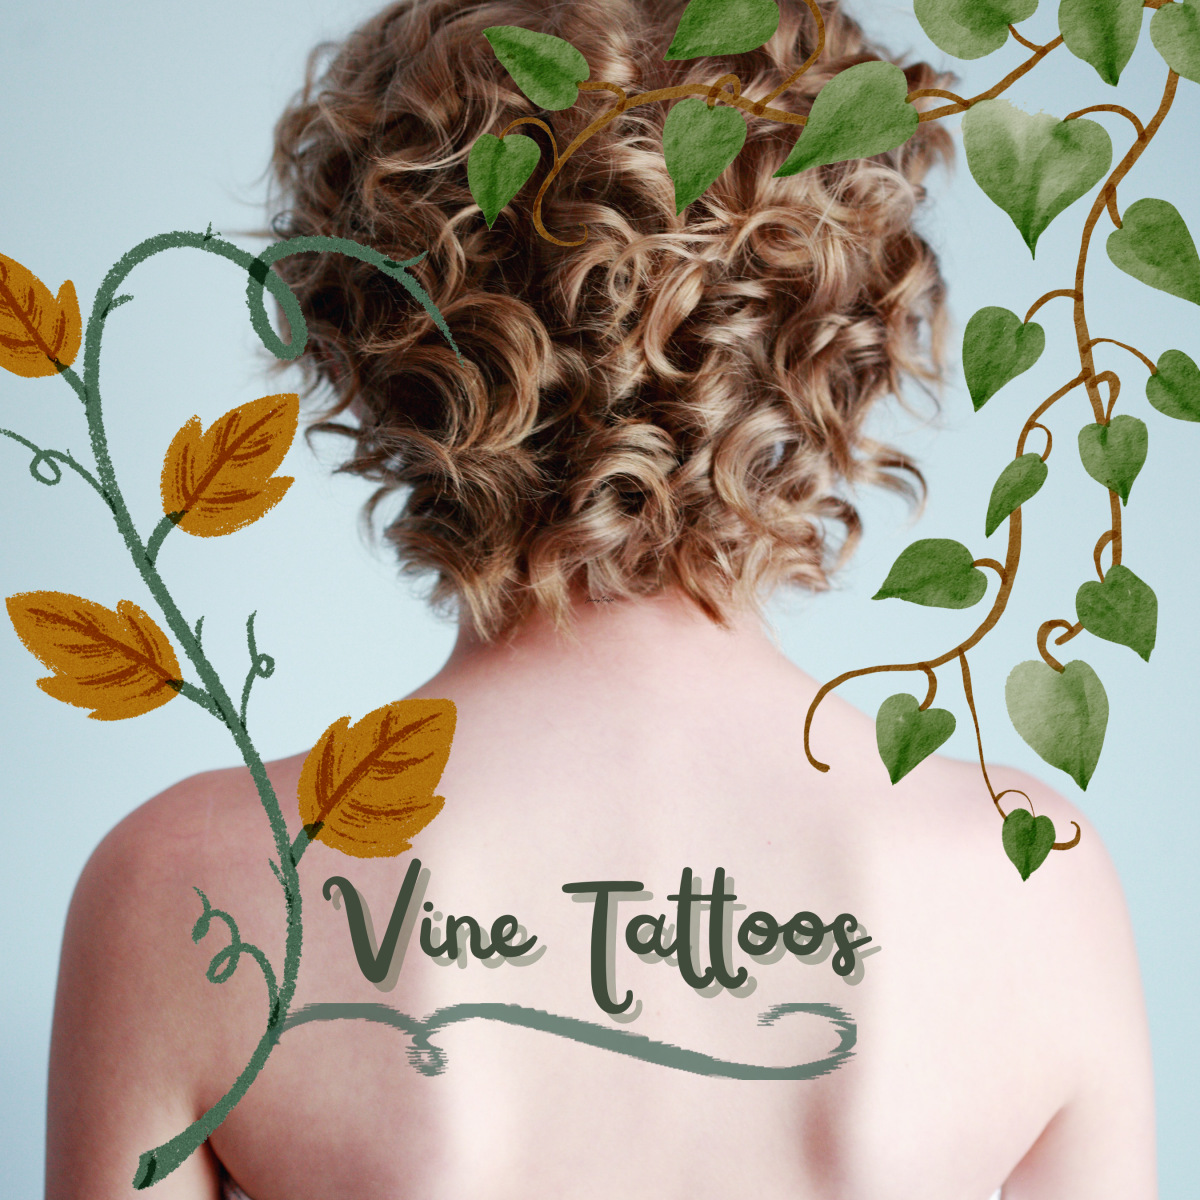 Vine Tattoos: Meanings, Designs, and Ideas